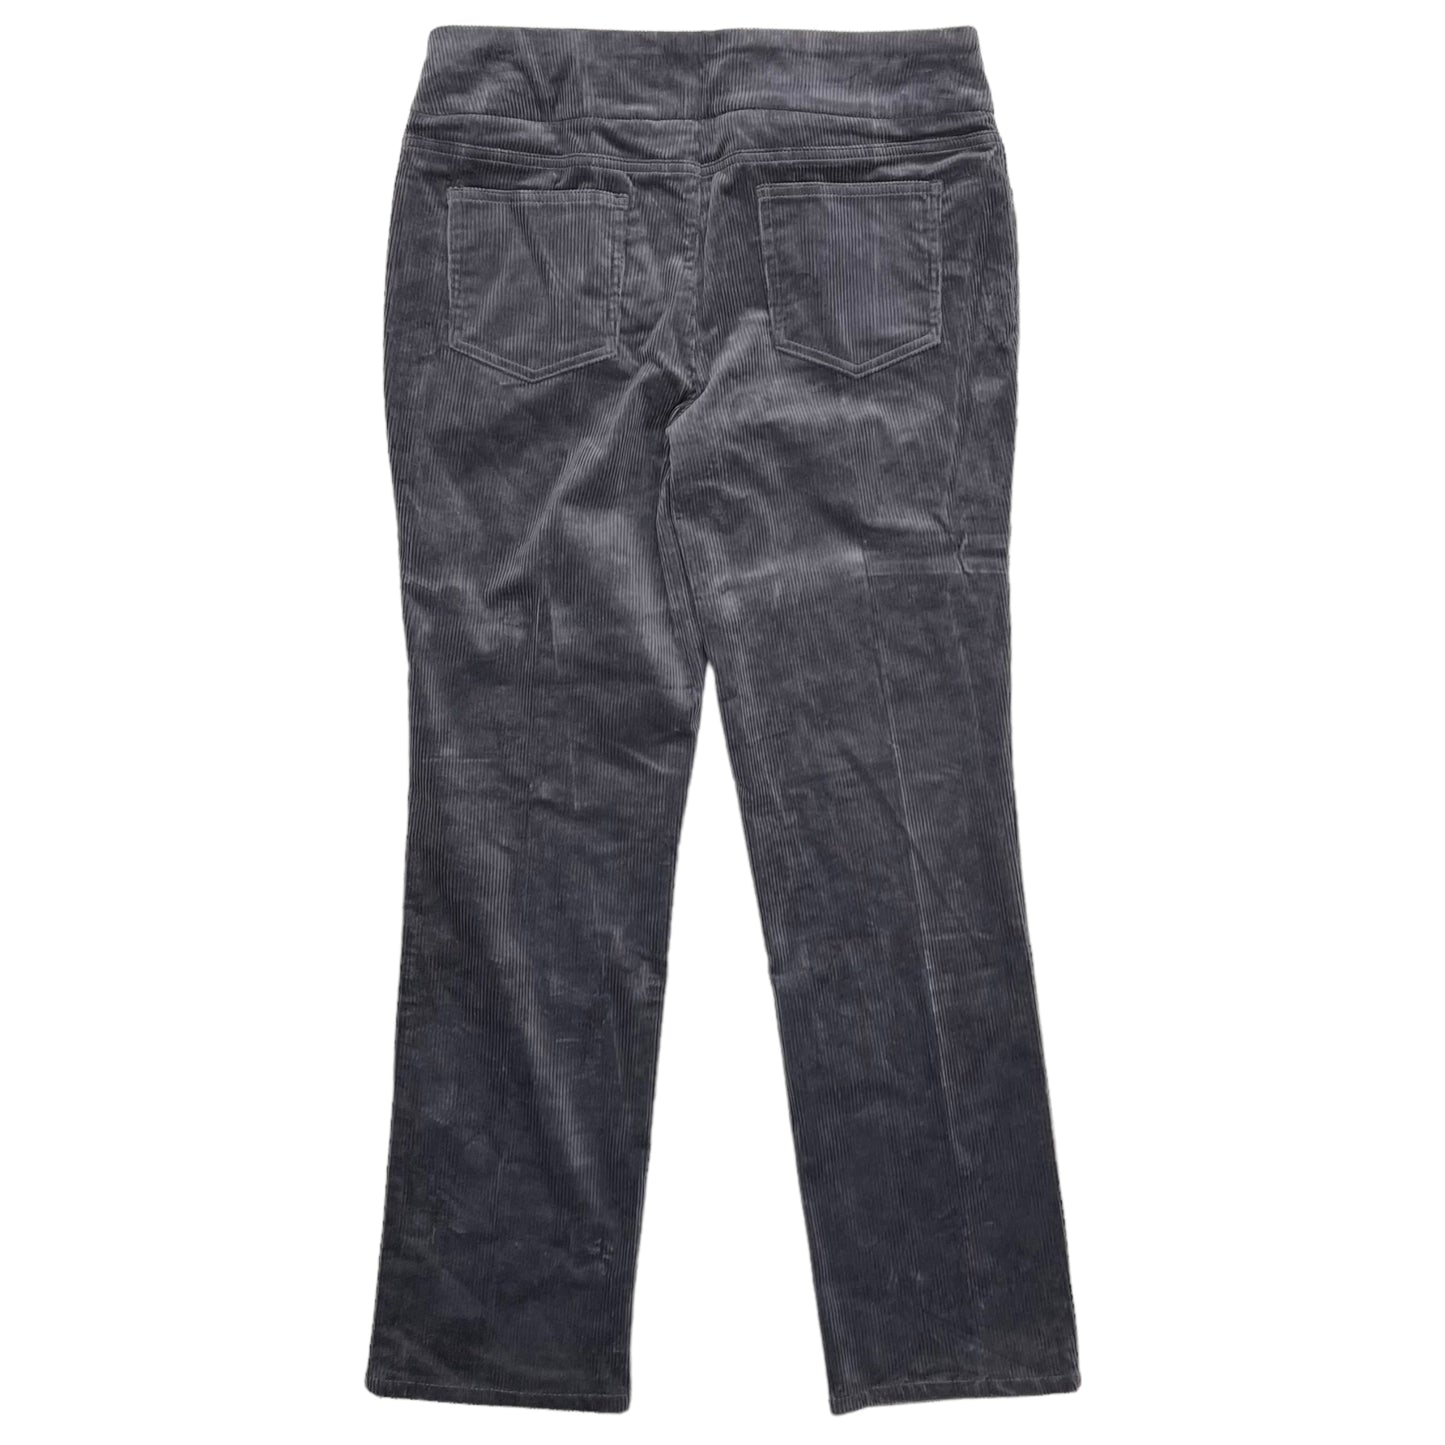 Pants Corduroy By Denim And Company  Size: 14